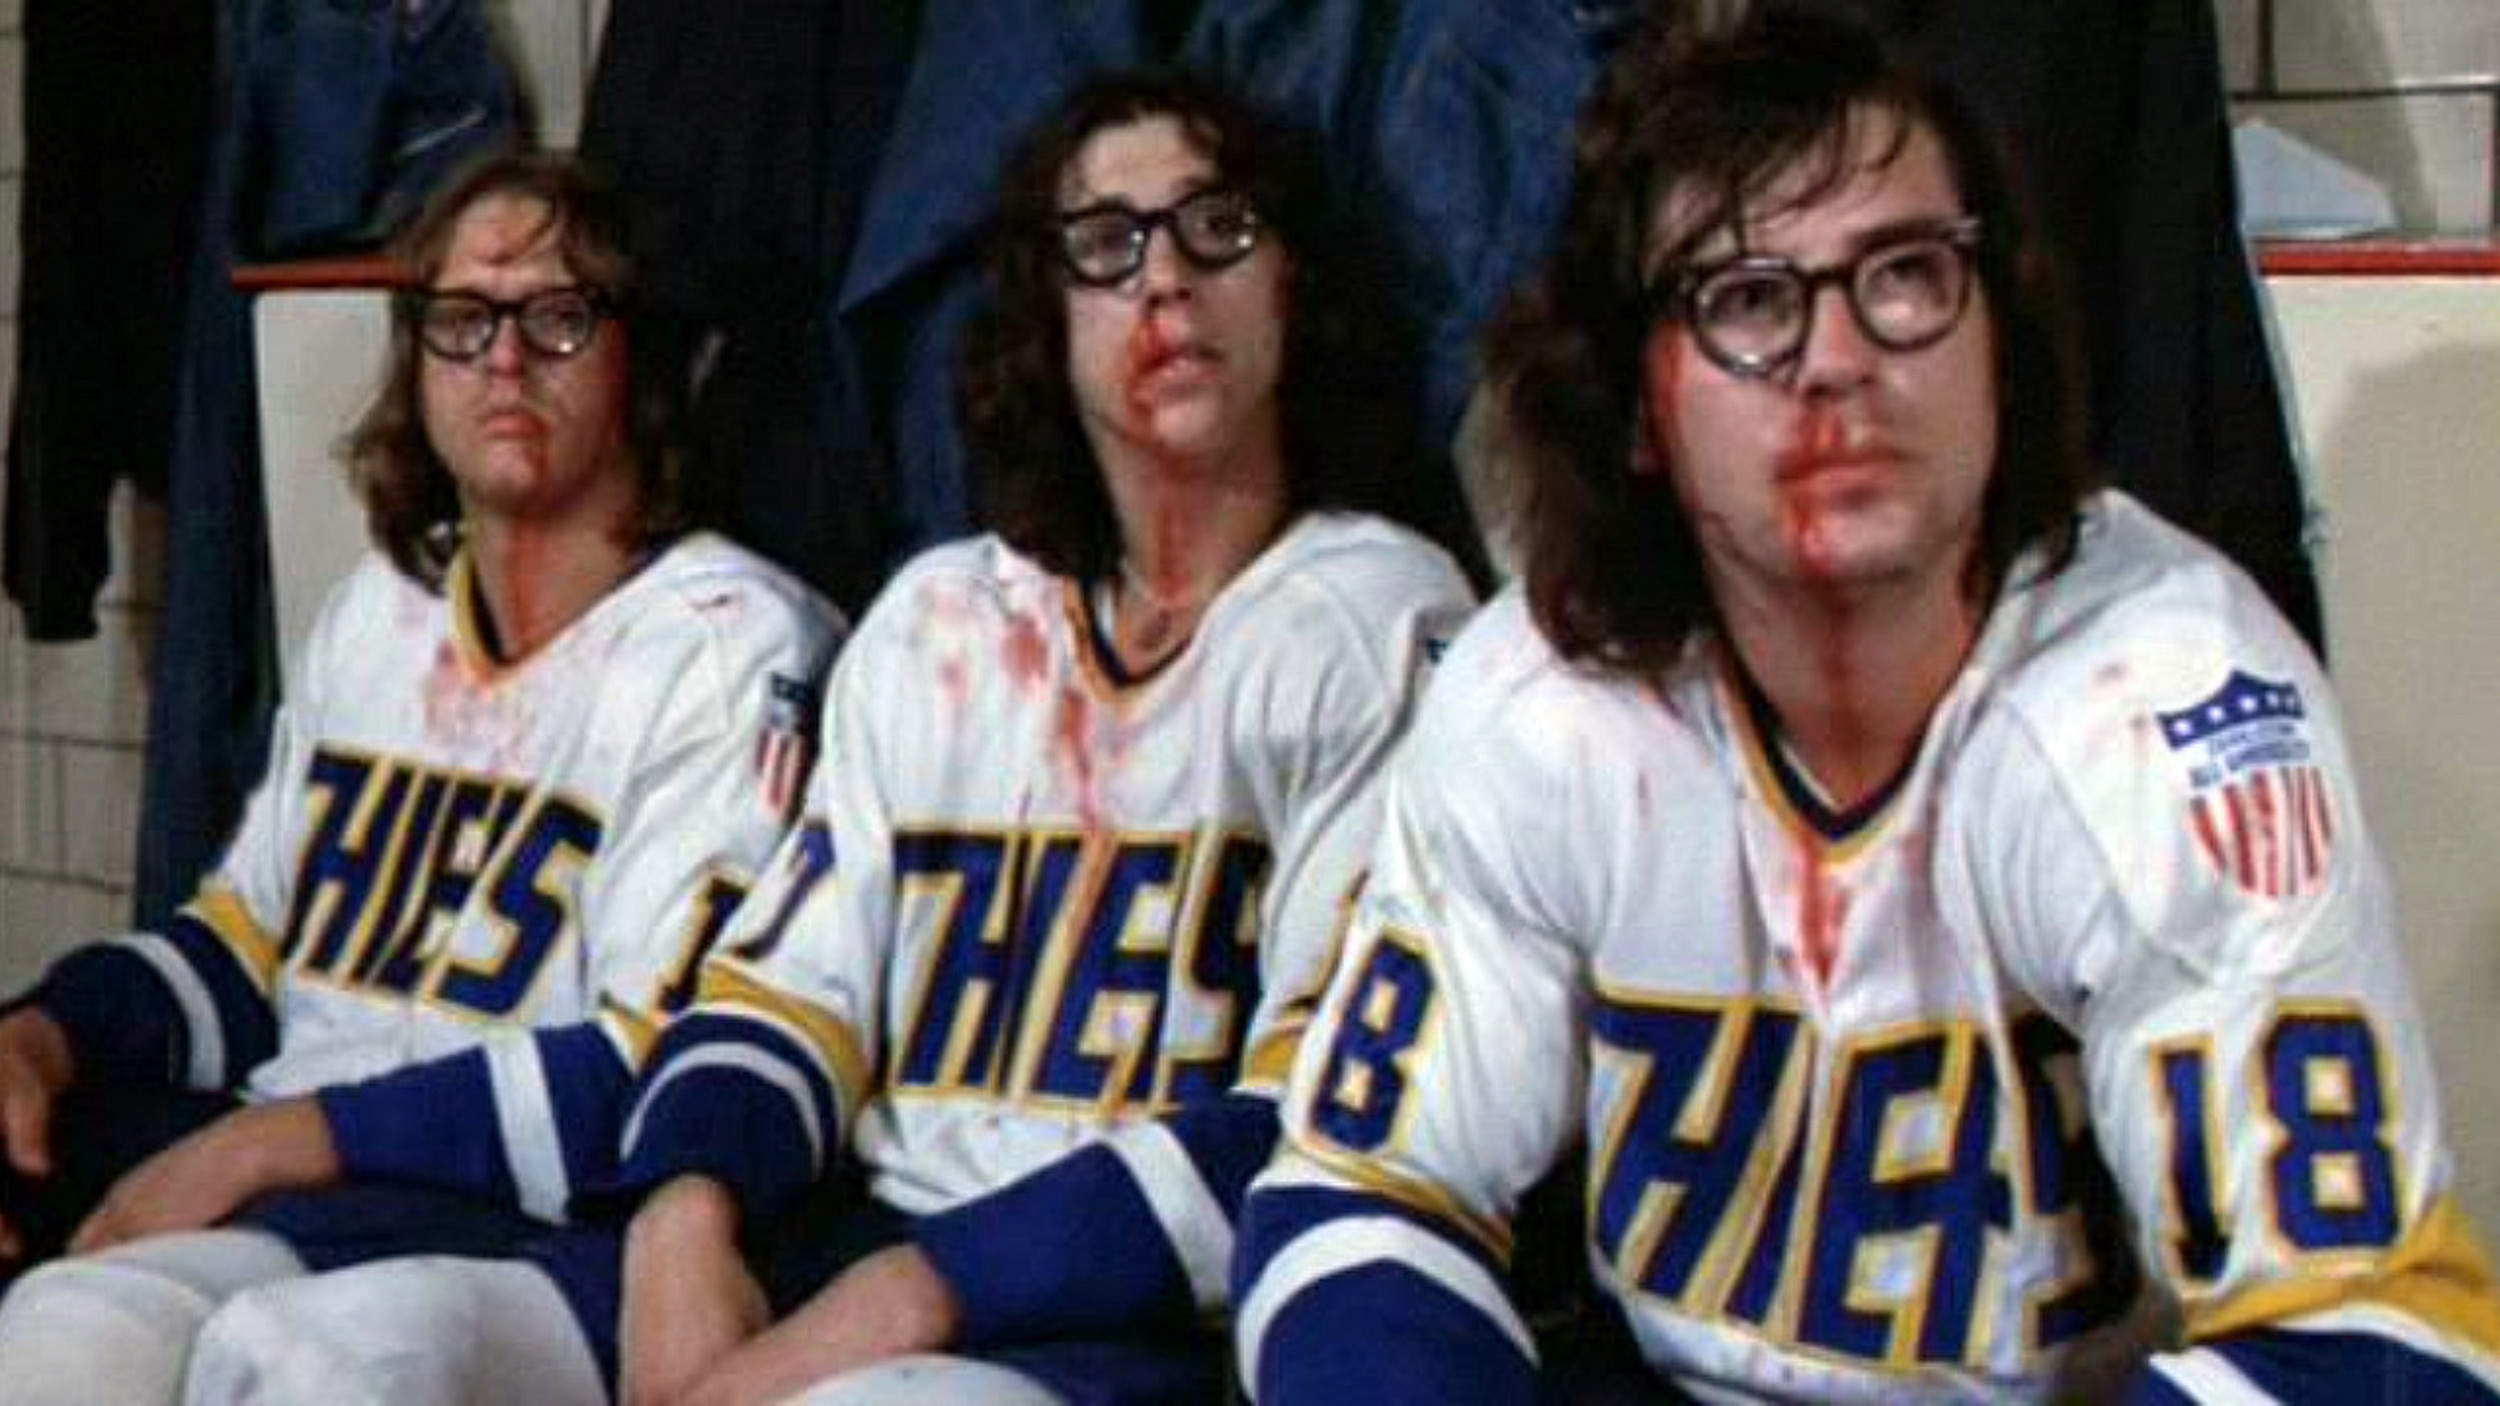 <p>Here we have the best sports movie. It’s led by Paul Newman, which helps. It has more substance and depth than some of the lighter sports fare, yet “Slap Shot” isn’t a feel-good movie. In fact, the members of the Charlestown Chiefs, a dying team in a dying city, are almost uniformly unlikable. They are crass people with personal issues, and they find notoriety by embracing violence on the ice. It’s funny, it’s sharp and it’s occasionally brutal. So while it may not be uplifting, “Slap Shot” is the best sports movie for a multitude of other reasons.</p><p><a href='https://www.msn.com/en-us/community/channel/vid-cj9pqbr0vn9in2b6ddcd8sfgpfq6x6utp44fssrv6mc2gtybw0us'>Did you enjoy this slideshow? Follow us on MSN to see more of our exclusive entertainment content.</a></p>